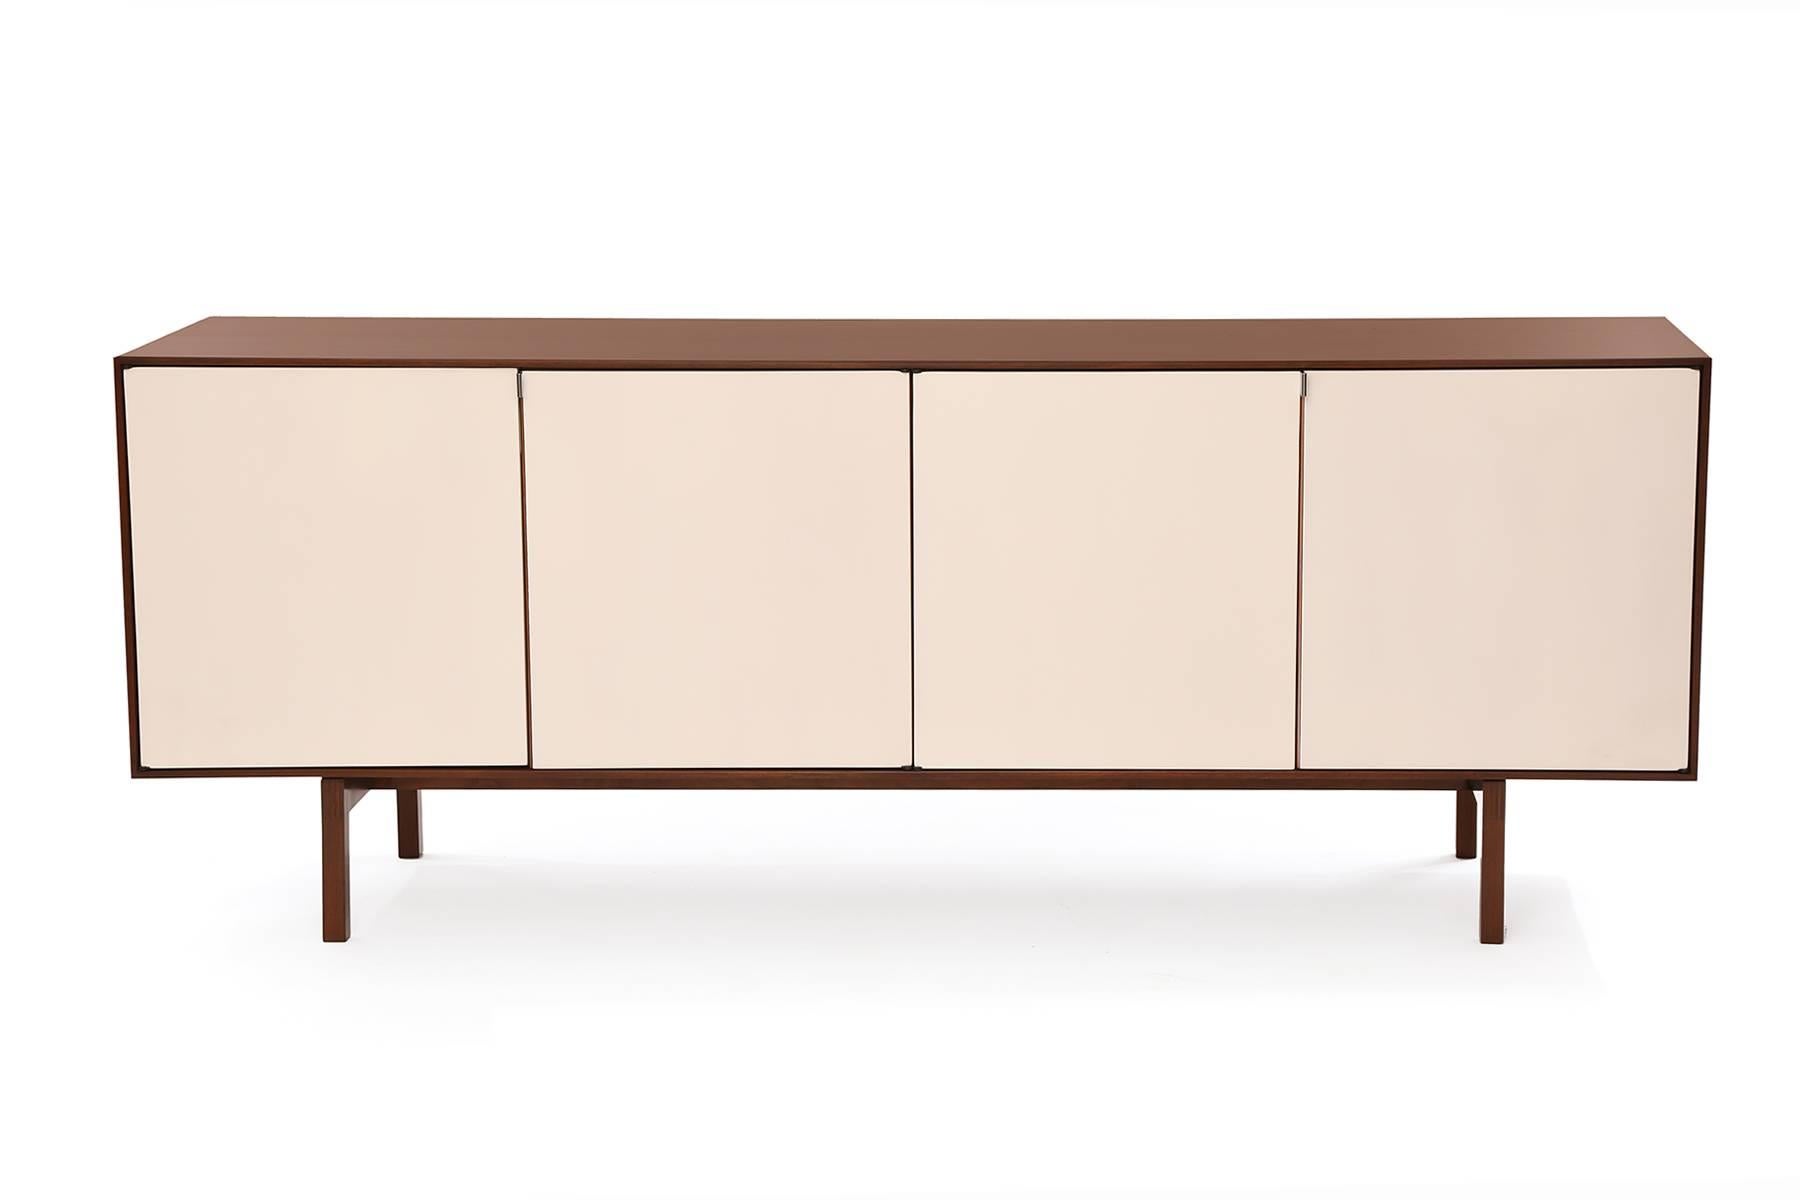 Florence Knoll for Knoll sideboard or credenza circa early 1950s. This stunning example has four white lacquered doors, walnut case and steel door pulls. The oak interior has two slatted drawers and adjustable shelves. It has been newly and